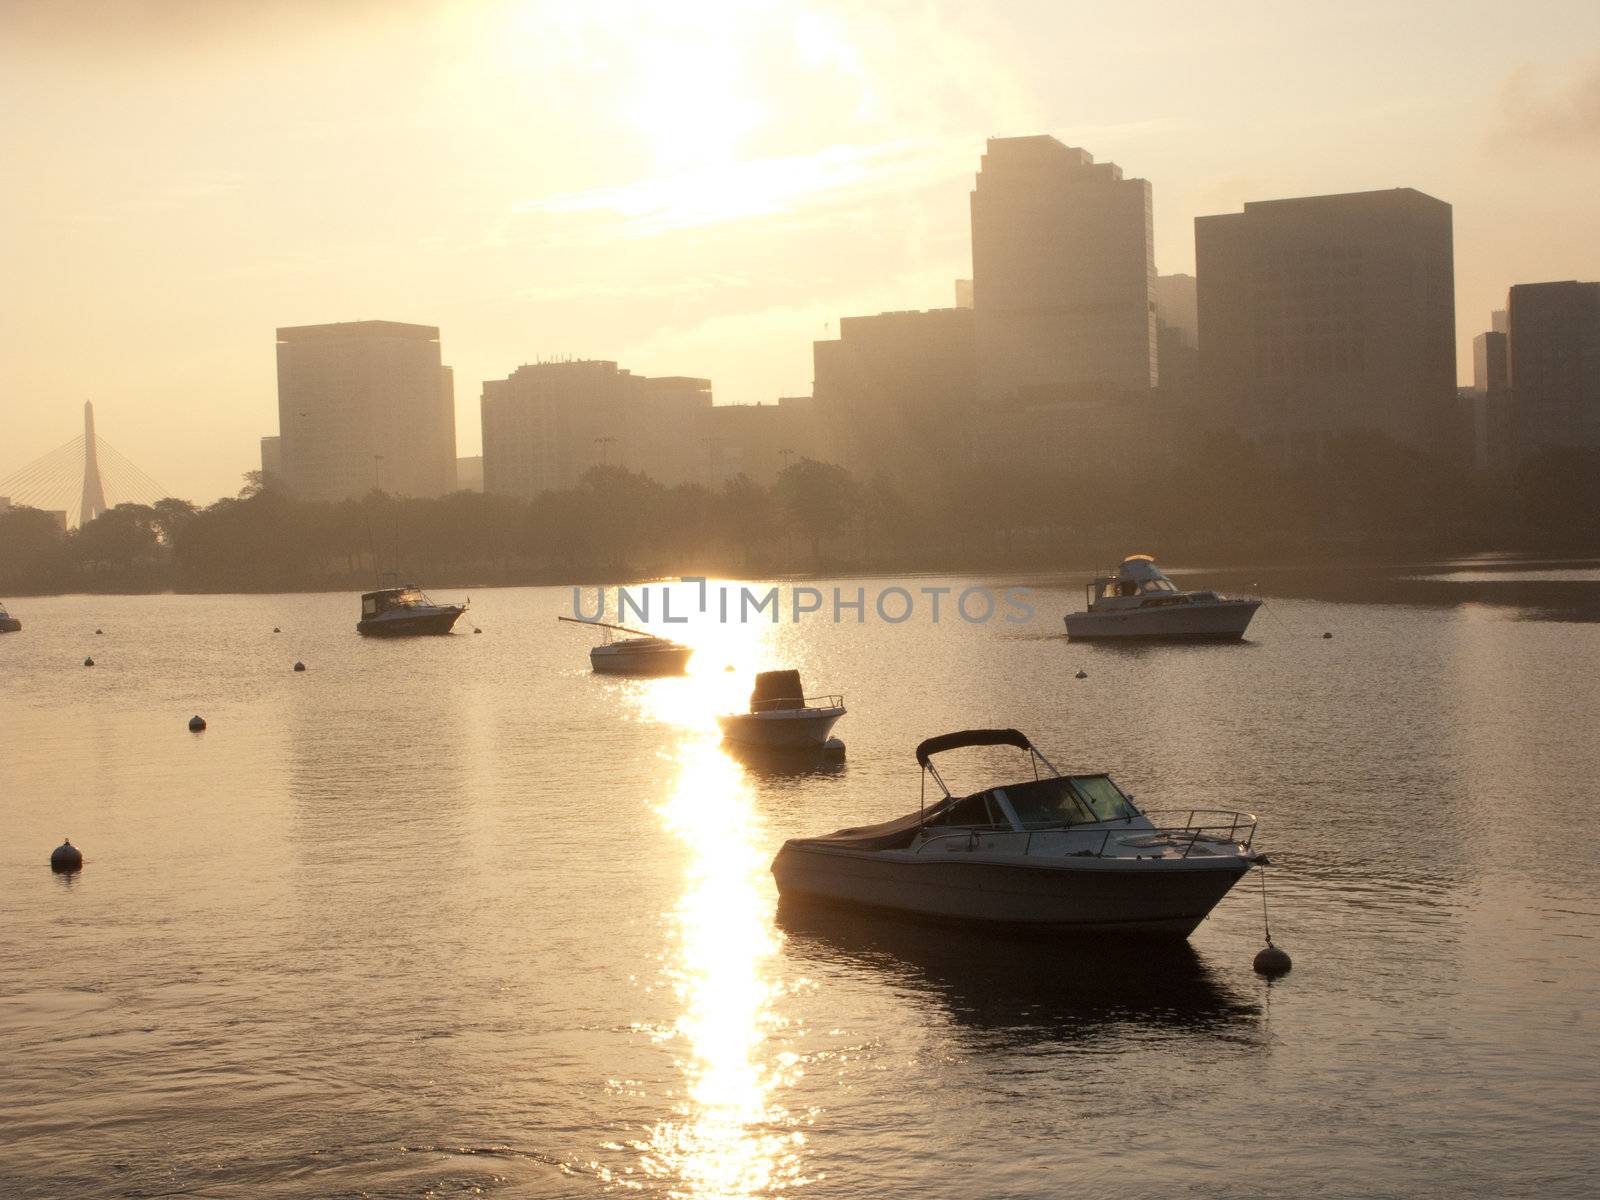 Motorboats anchored in the Charles River in Boston by edan